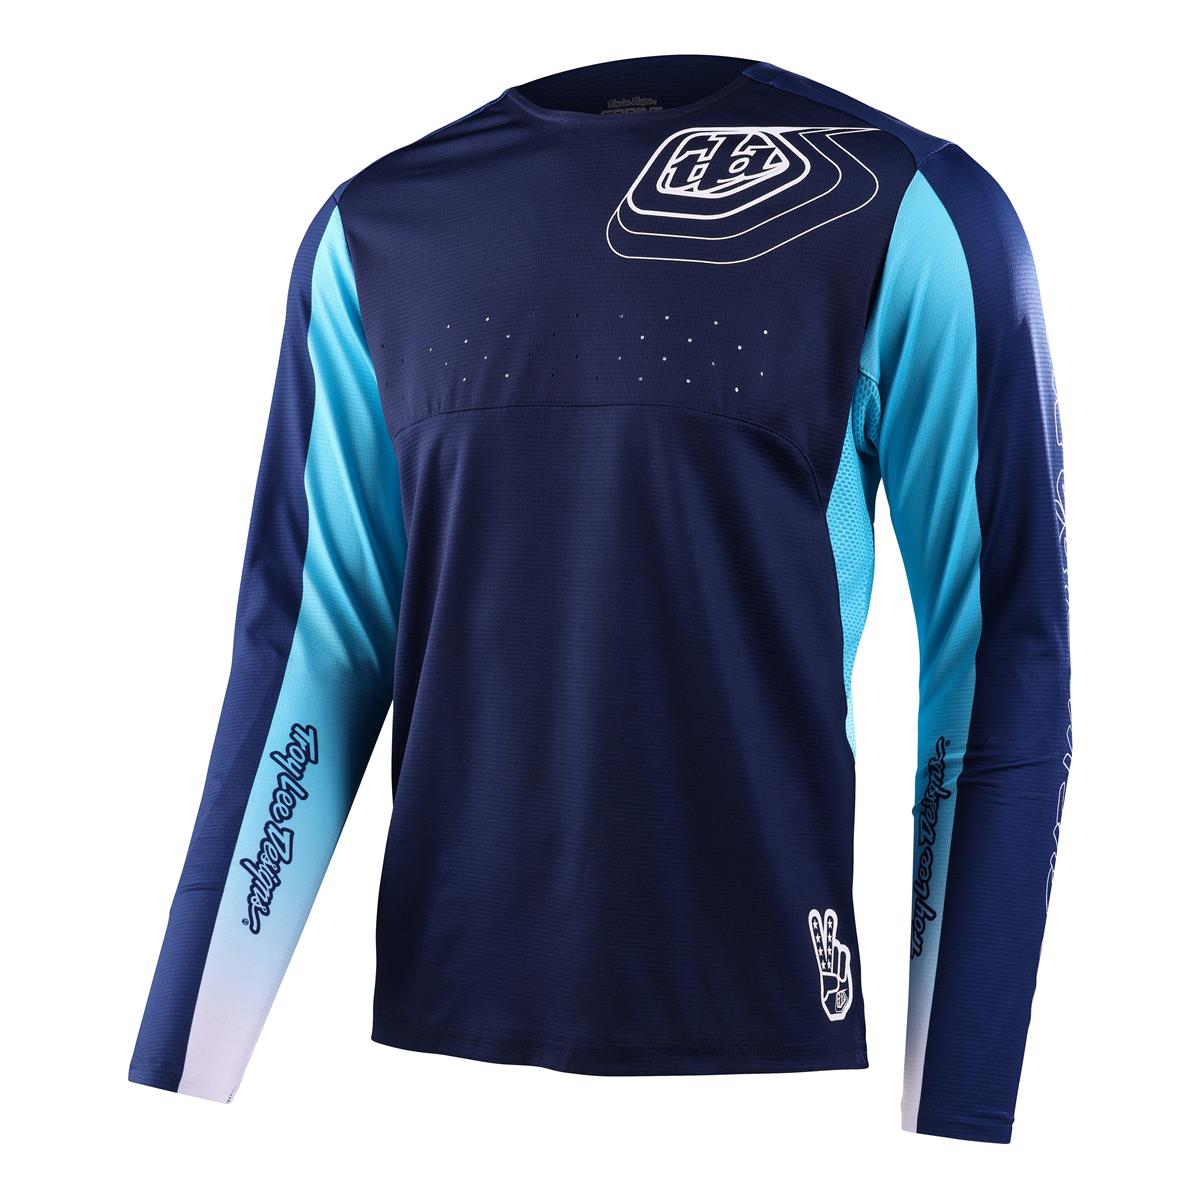 Troy Lee Designs Maillot VTT manches longues Sprint Richter - Navy